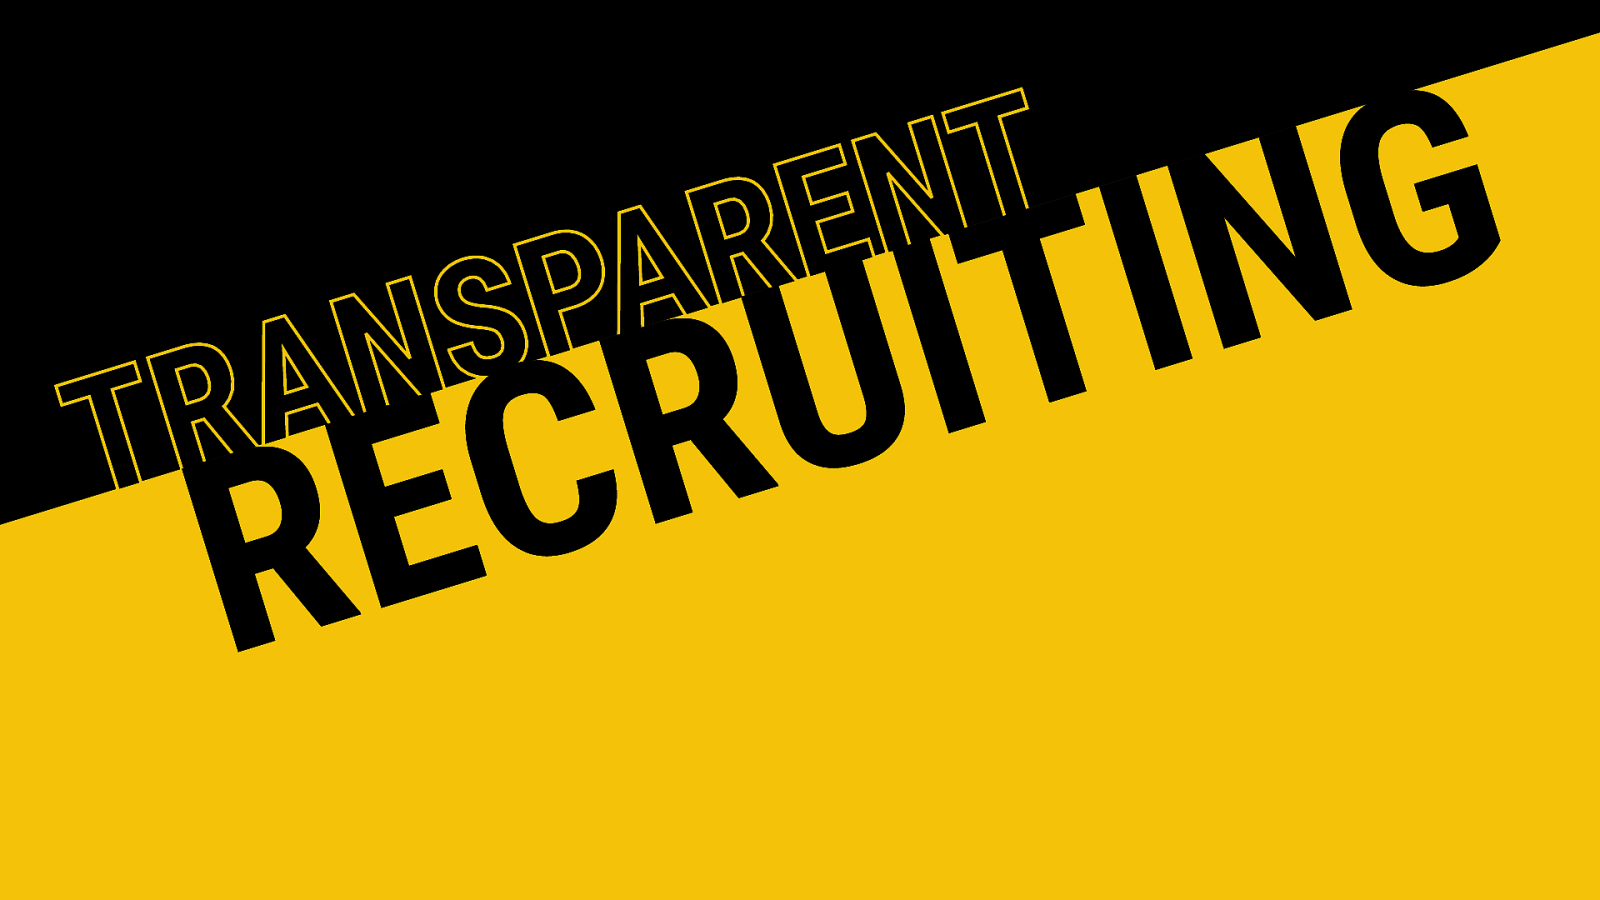 Keynote: Transparent Recruiting—A Better Way to Hire People